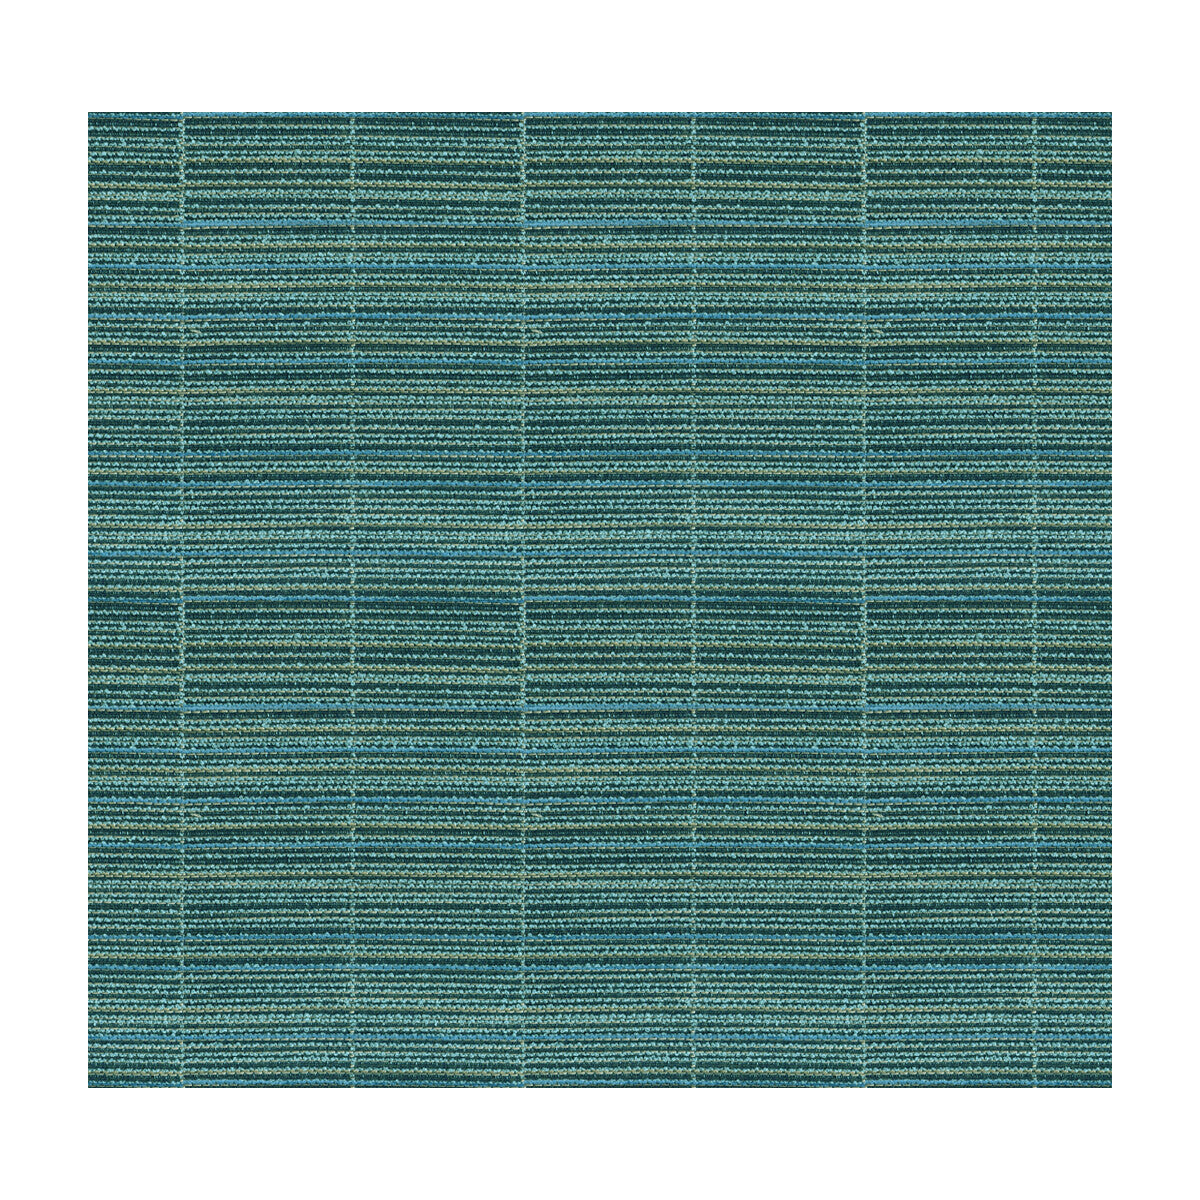 Dune fabric in ocean color - pattern GWF-3421.516.0 - by Lee Jofa Modern in the Kelly Wearstler Terra Firma Textiles collection